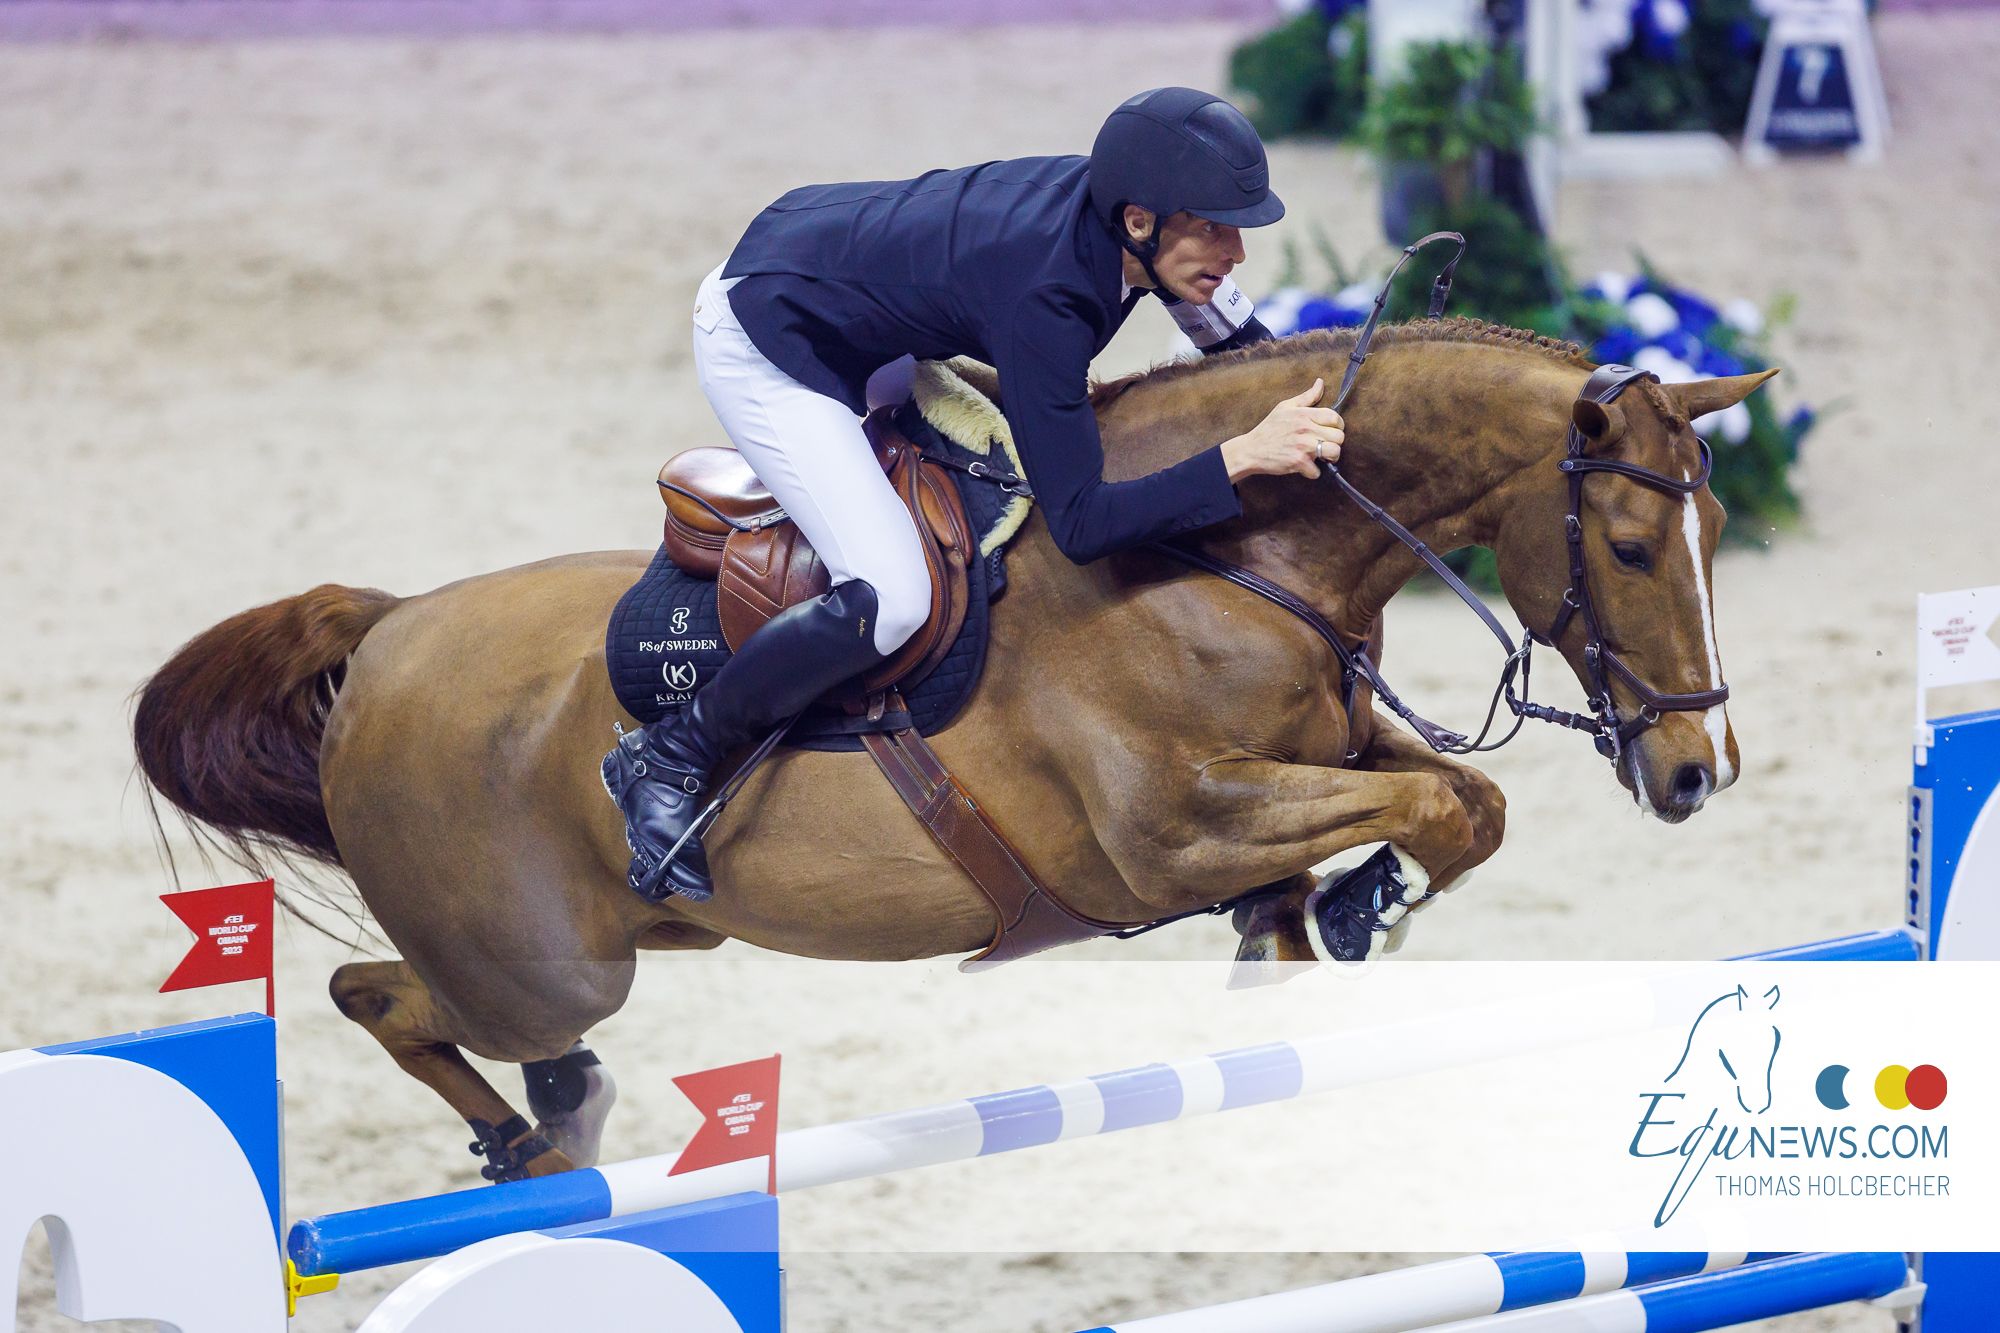 Henrik von Eckermann and King Edward take lead in race for FEI World Cup Finals!